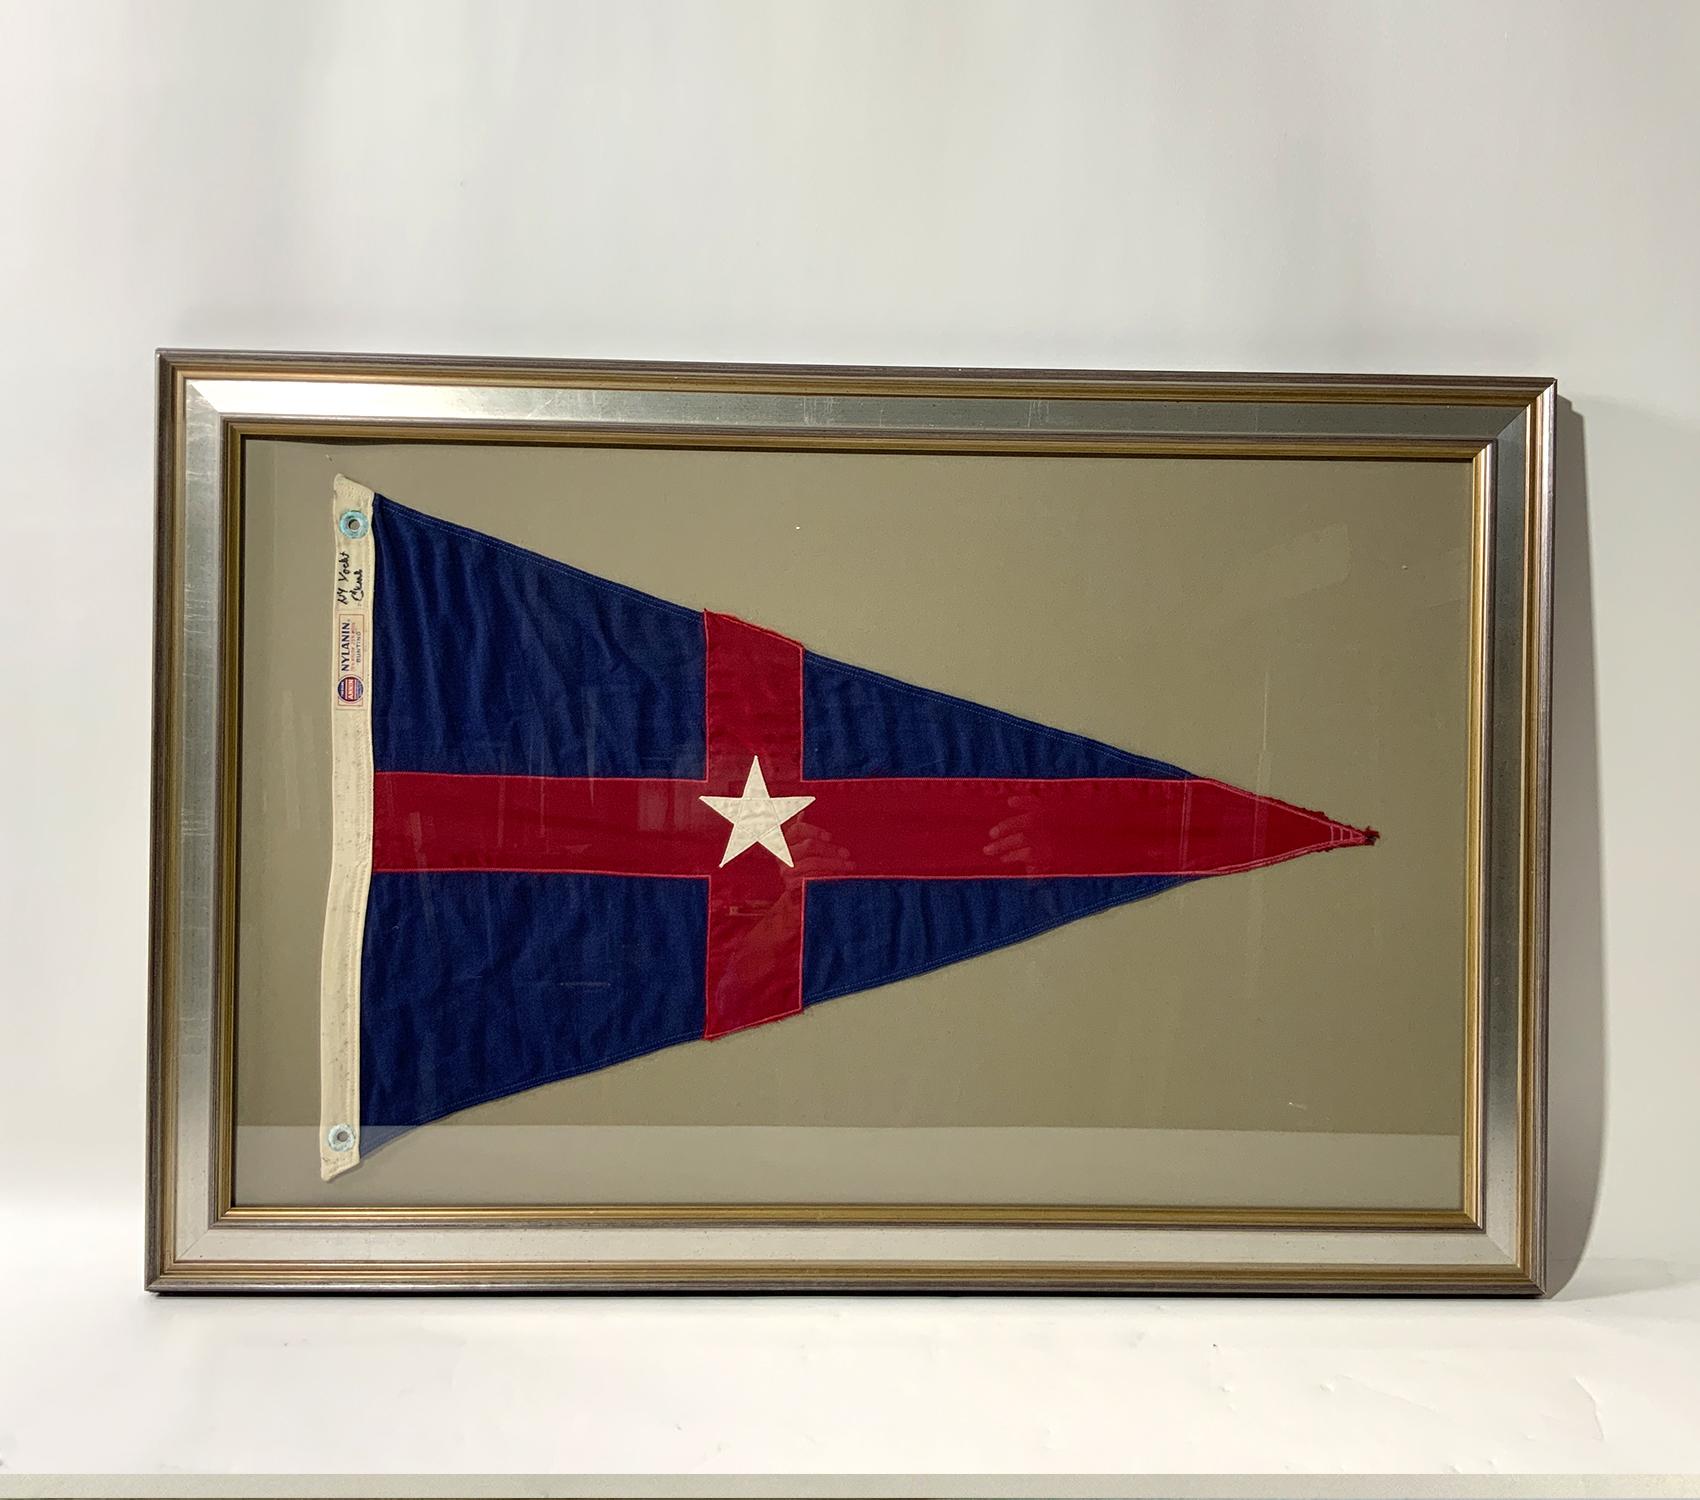 Vintage framed New York Yacht Club Burgee. Flag is a red field with crossed blue stripes and white star. The N.Y.Y.C. has clubhouses in Bew York and Newport. Flag is by Annin of New York, makers of the flag from every America's Cup Yacht since 1851.